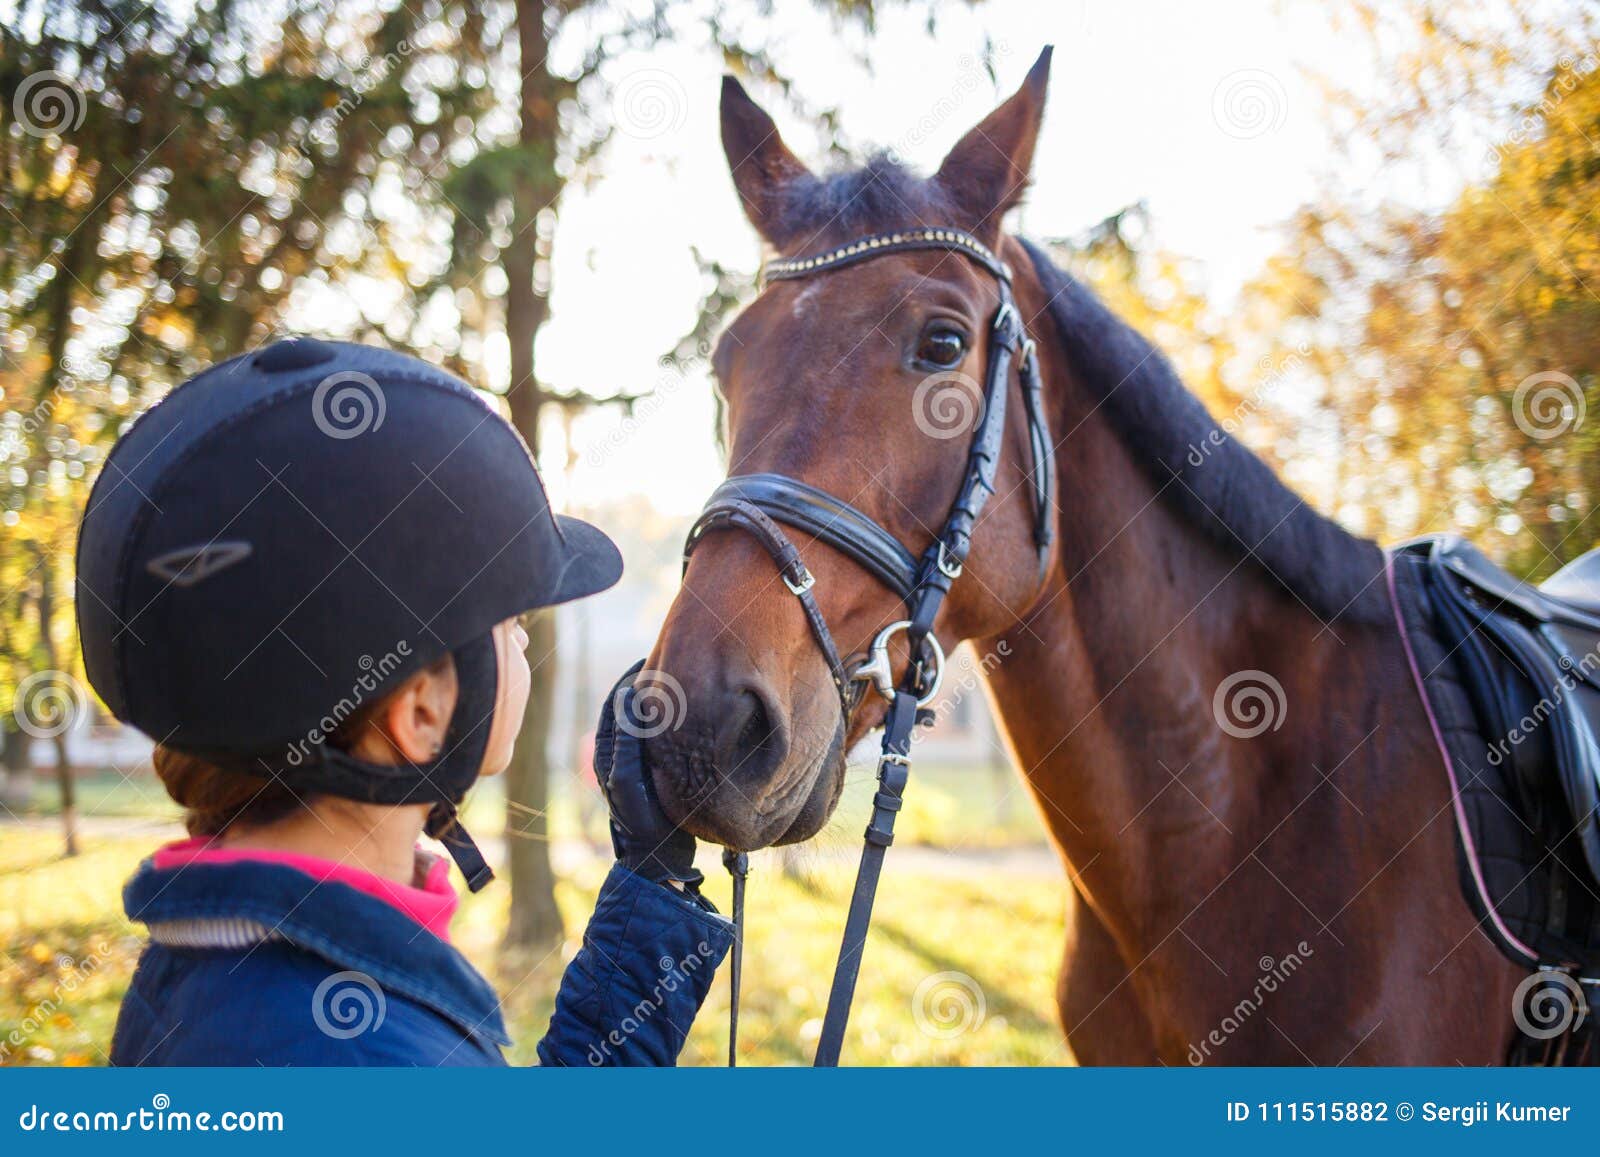 close up portrait of bay horse with rider girl